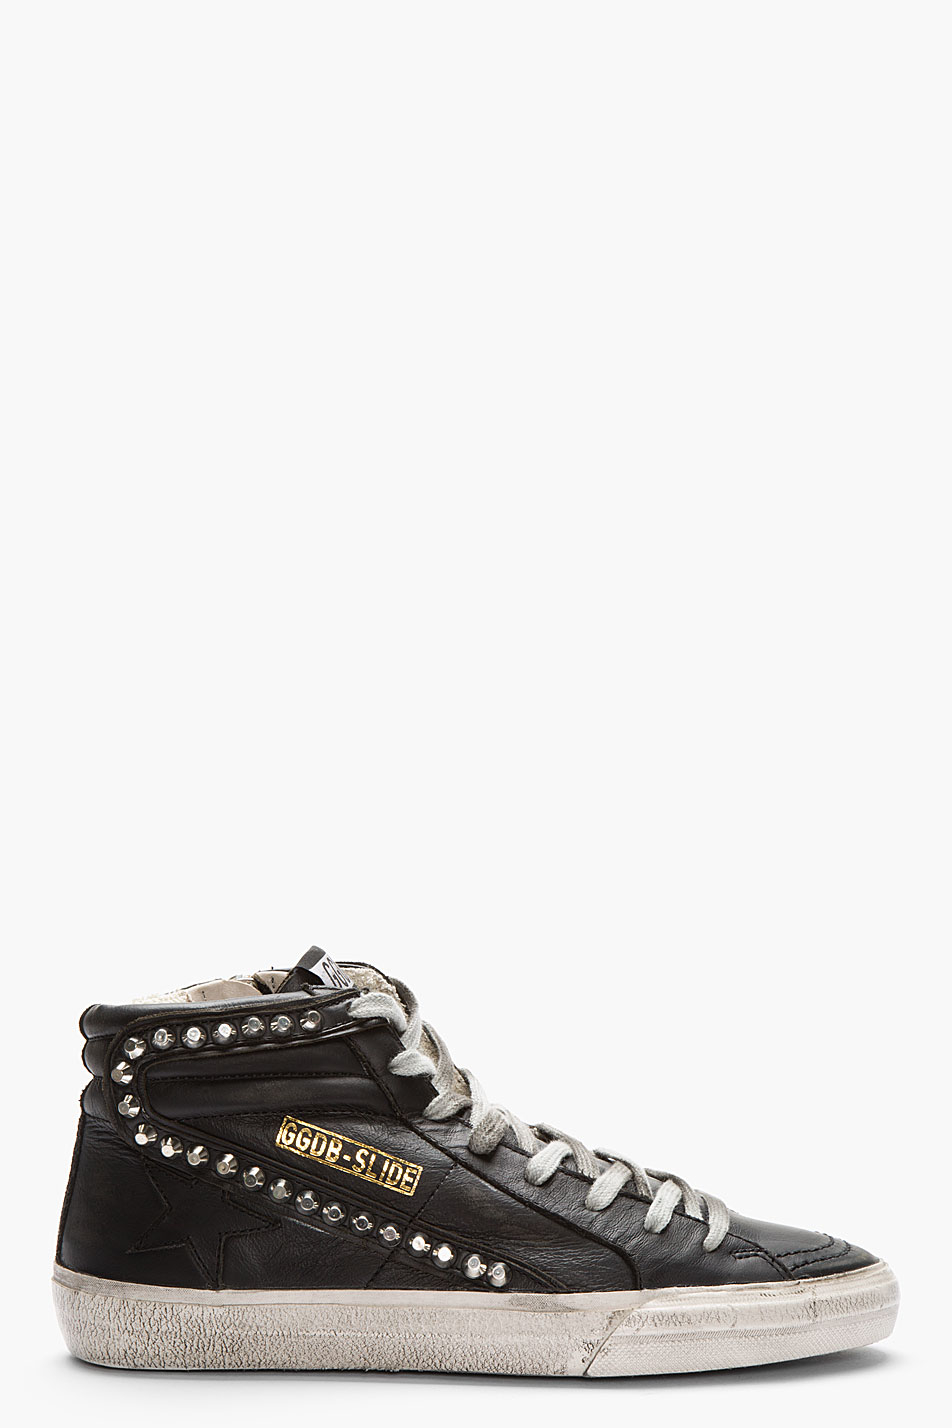 golden goose studded sneakers